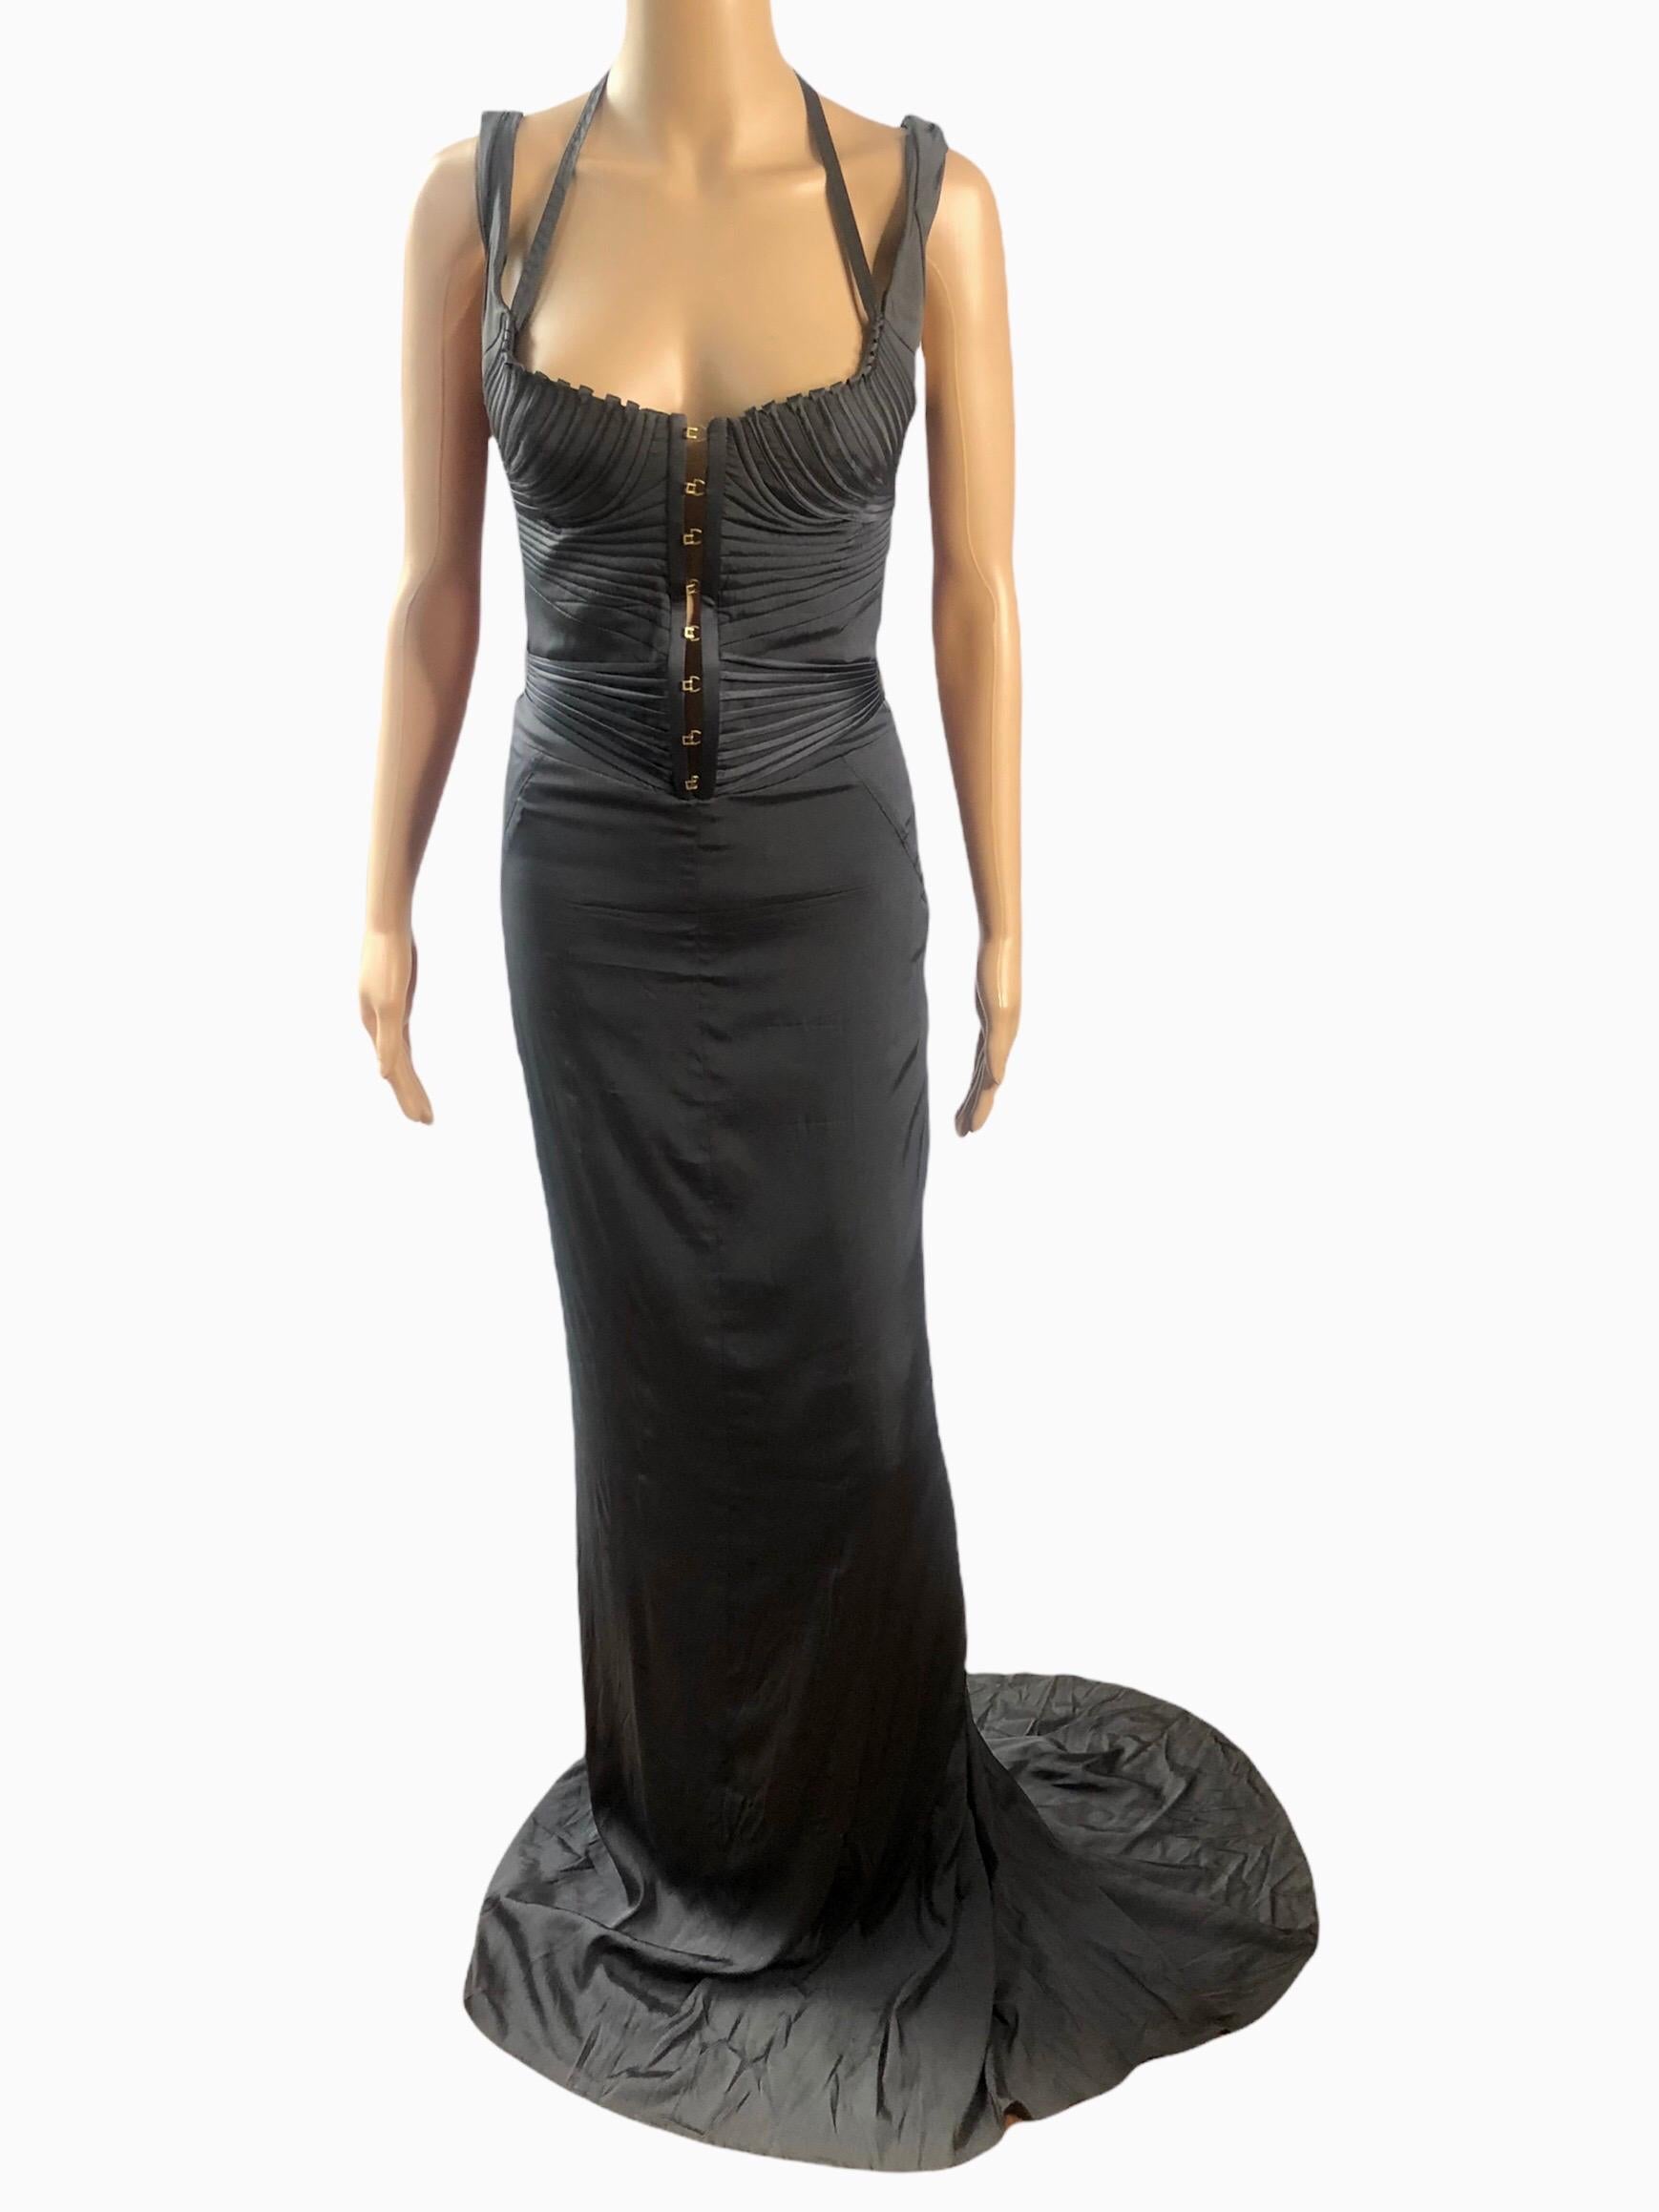 Women's Tom Ford for Gucci F/W 2003 Bustier Corset Silk Evening Dress Gown